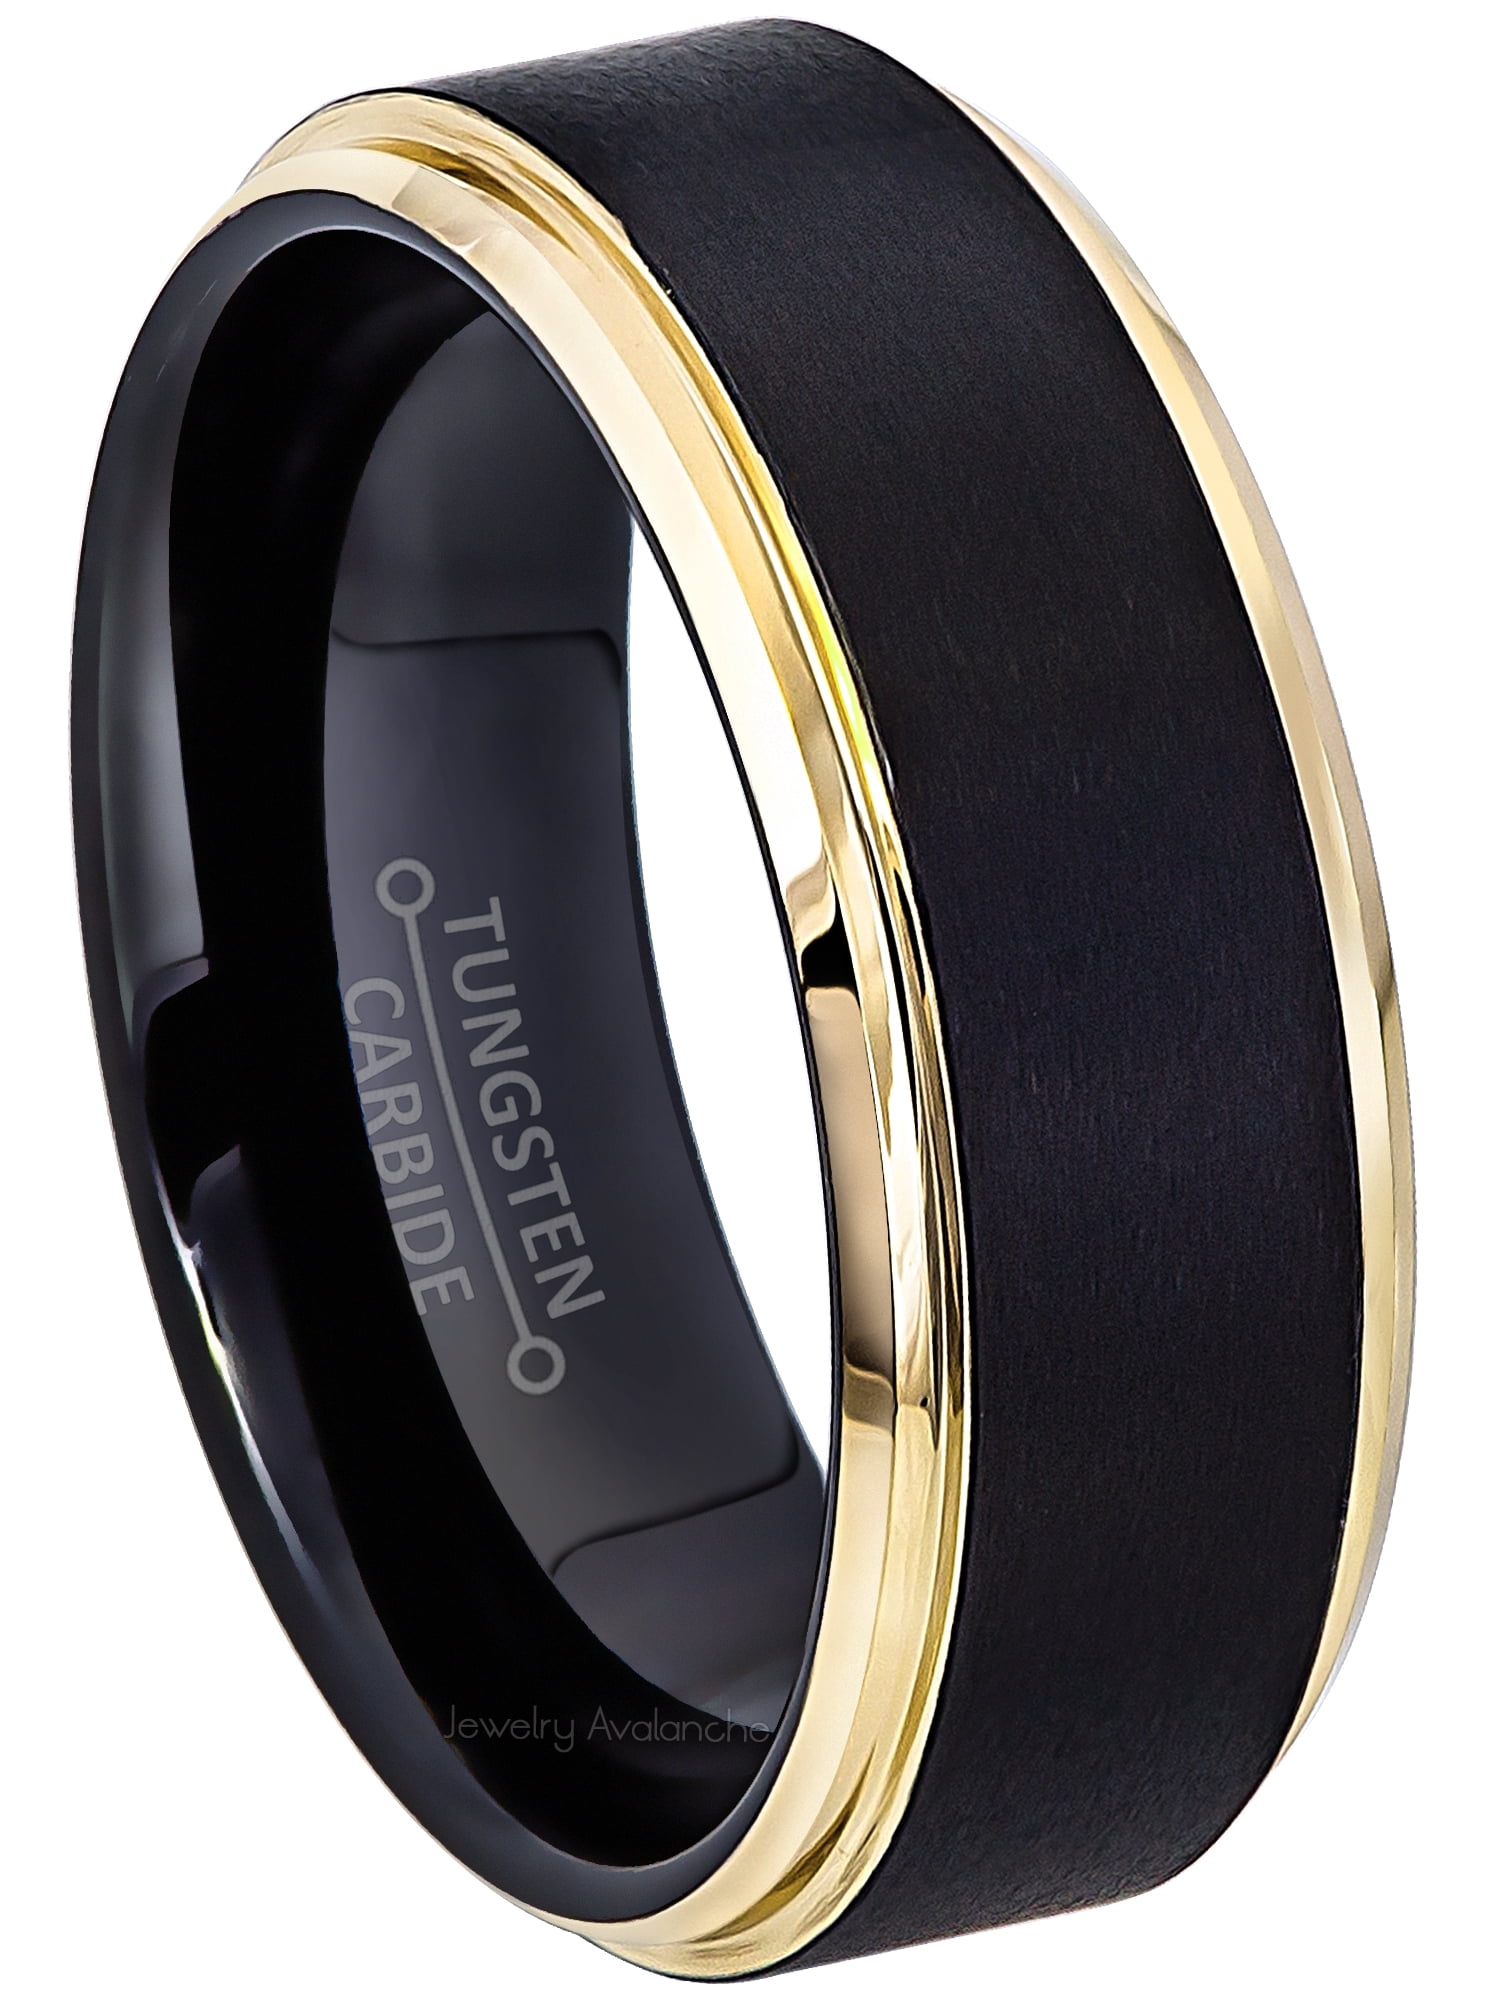 Gold Black Silver CZ Brushed Tungsten Carbide Ring Wedding Band Mens Jewelry 